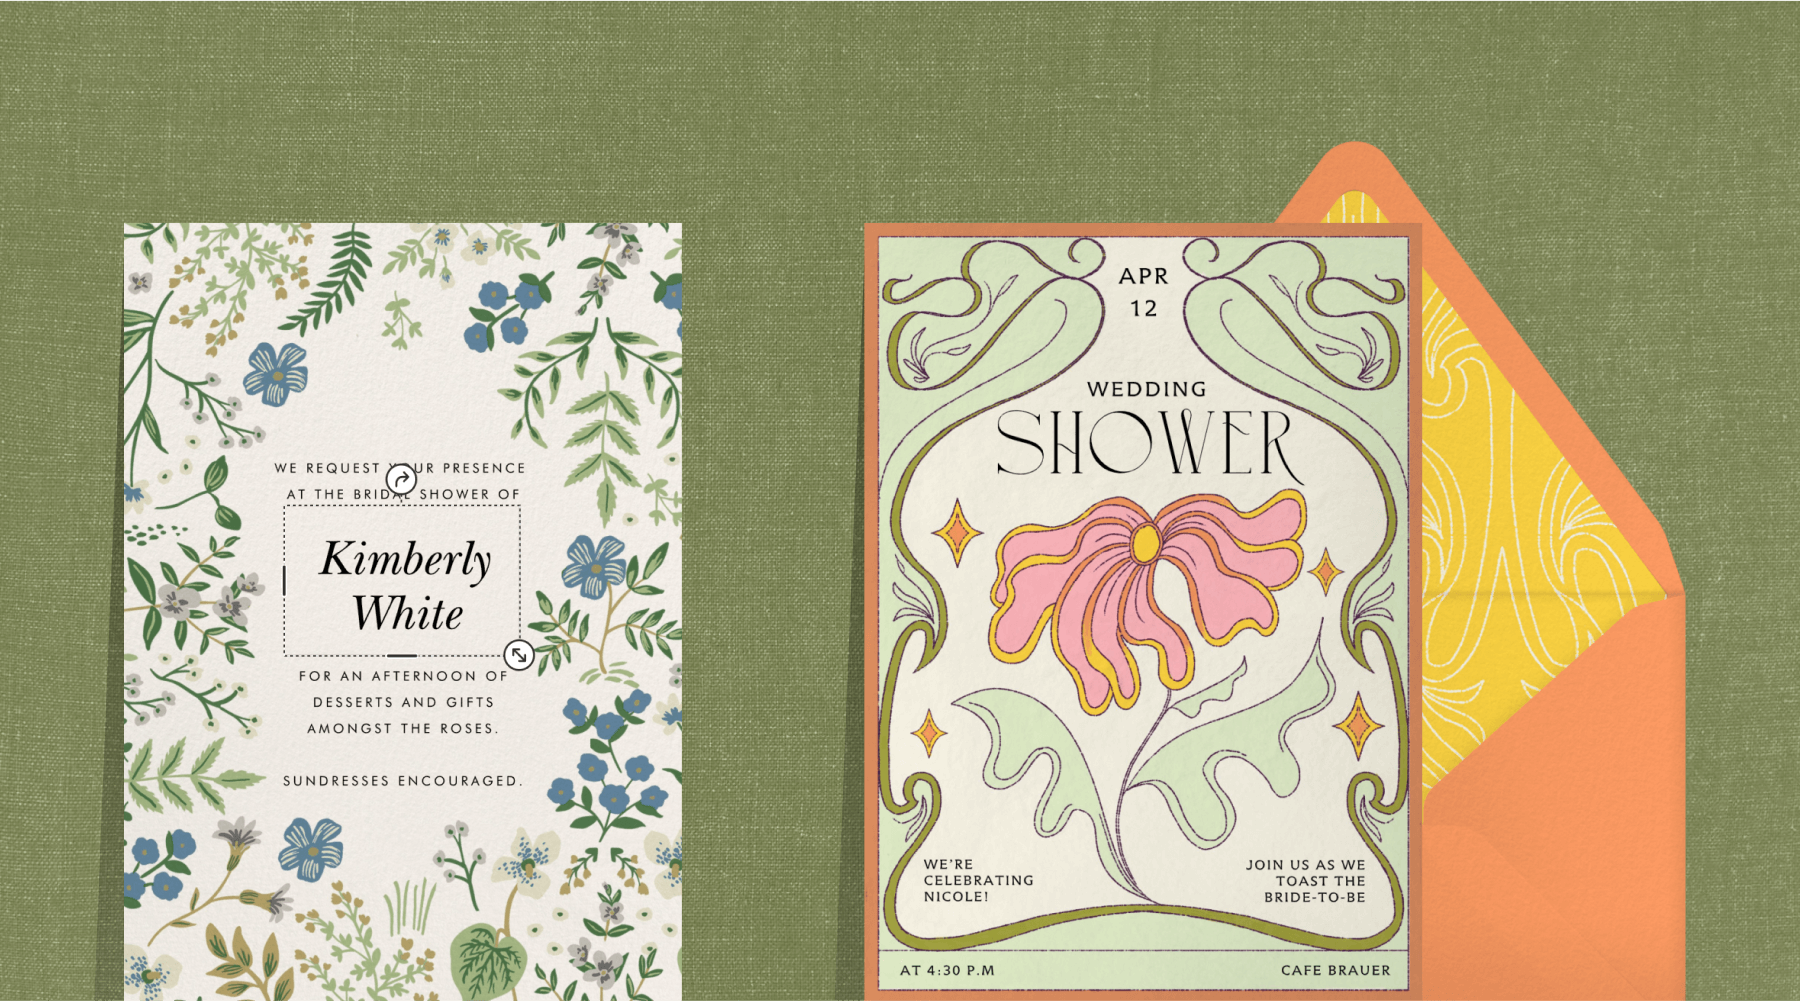 An invitation with a delicate blue and green floral border; an invitation with an Art Nouveau-inspired pink flower and orange envelope.